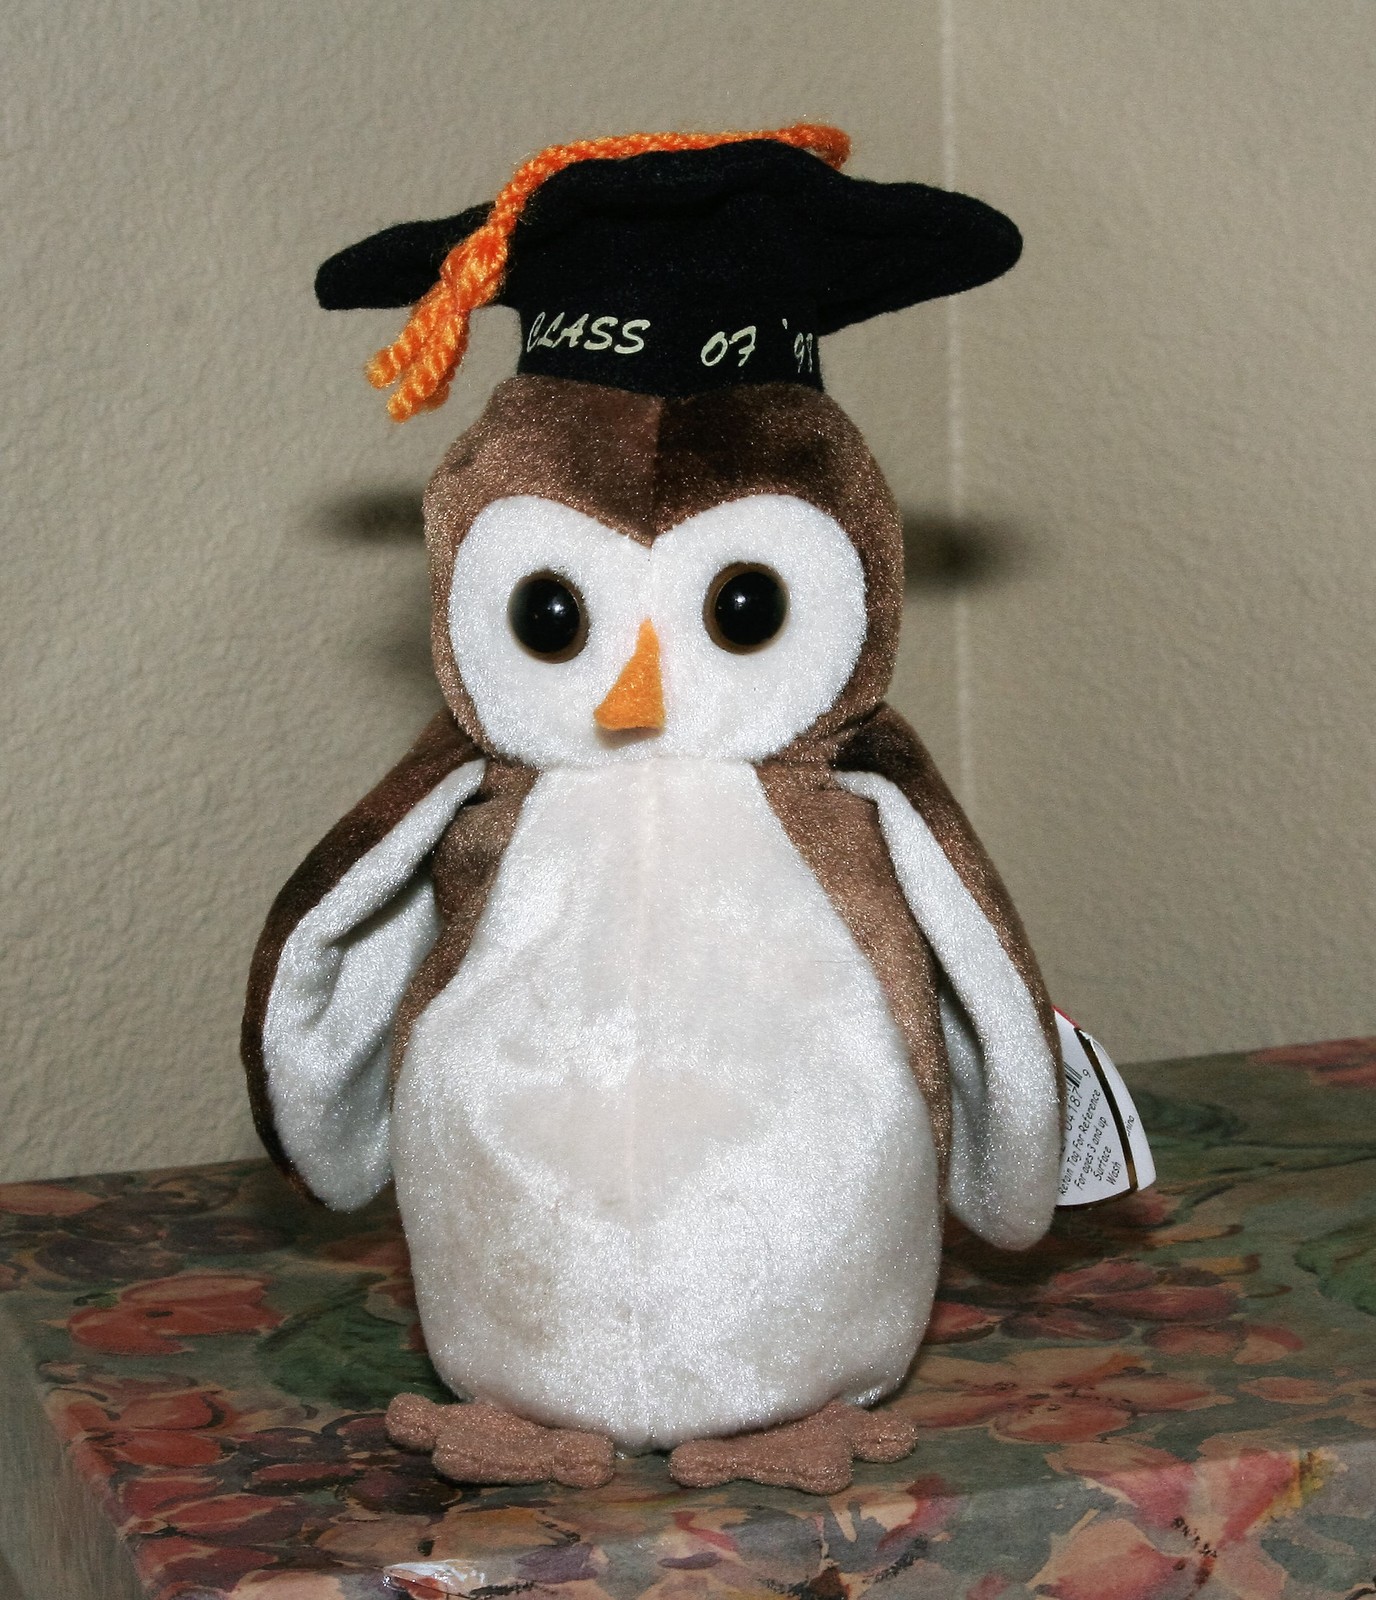 Ty Beanie Baby Wise The Graduation Owl Retired 1997 Plush Toy MWMT Ships FREE 